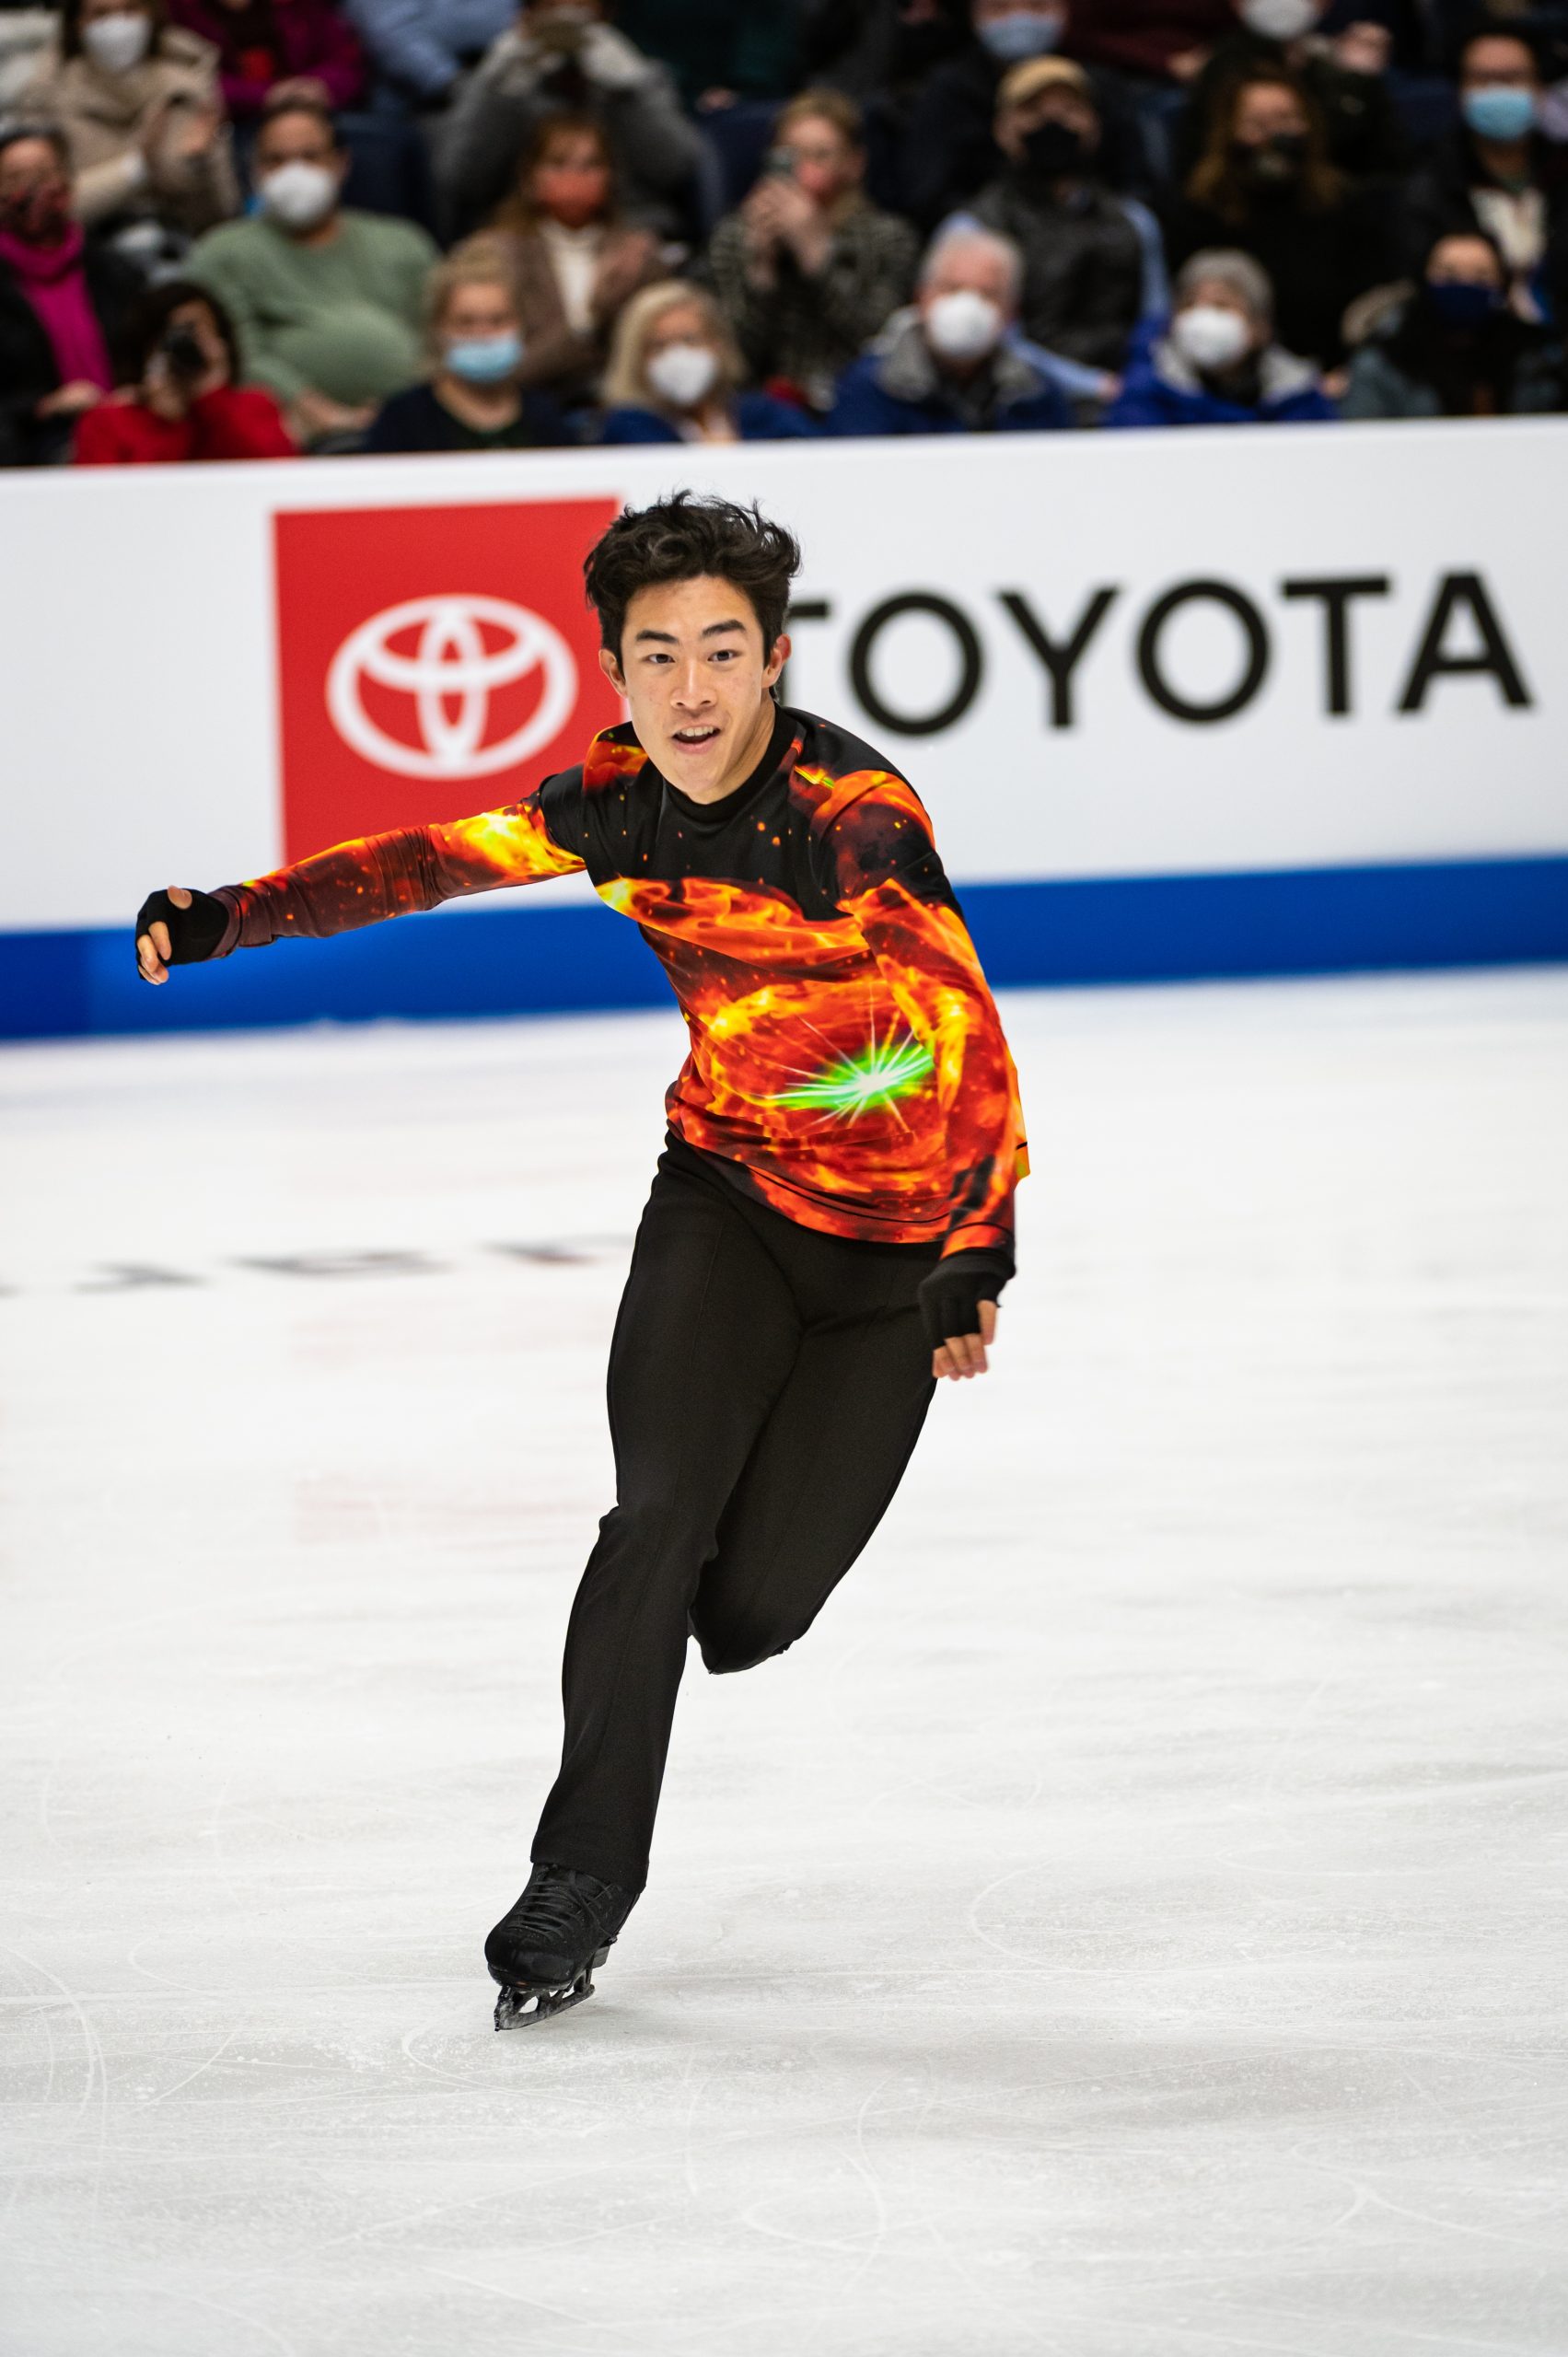 Nathan Chen during his Golden Performance
Photo Credit: Chris Allan/Shutterstock